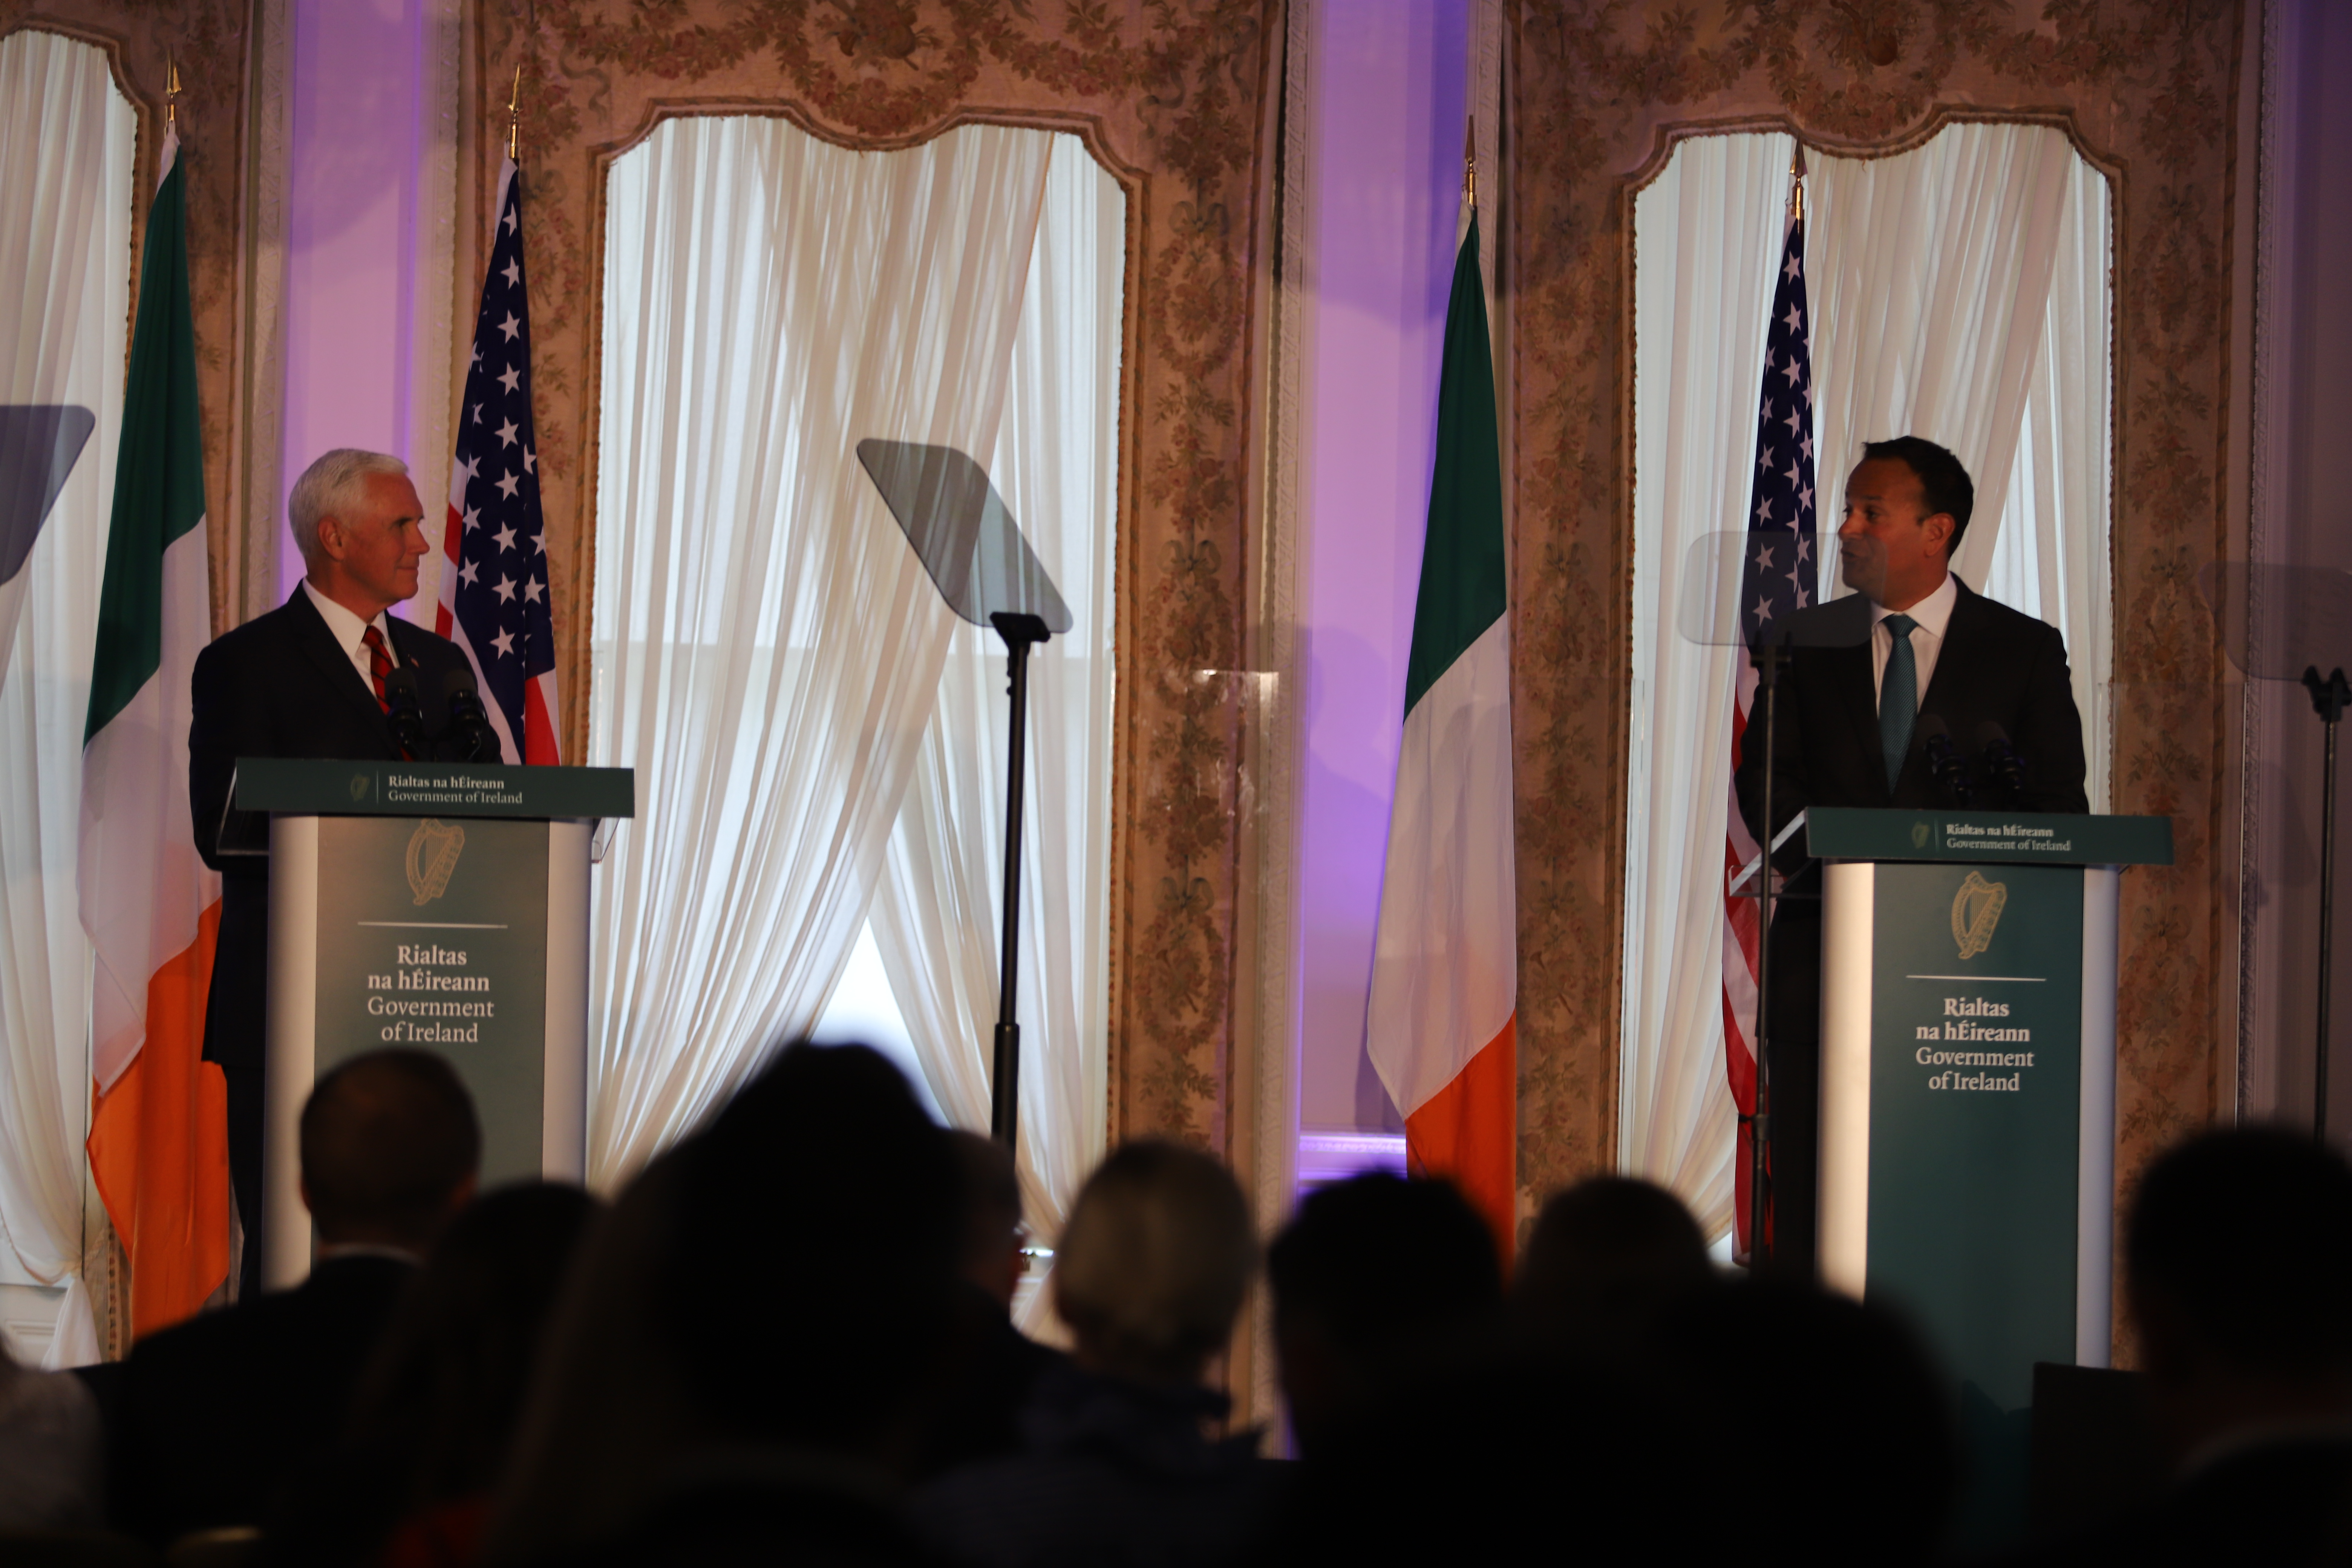 Taoiseach and Mike Pence 03.09.19